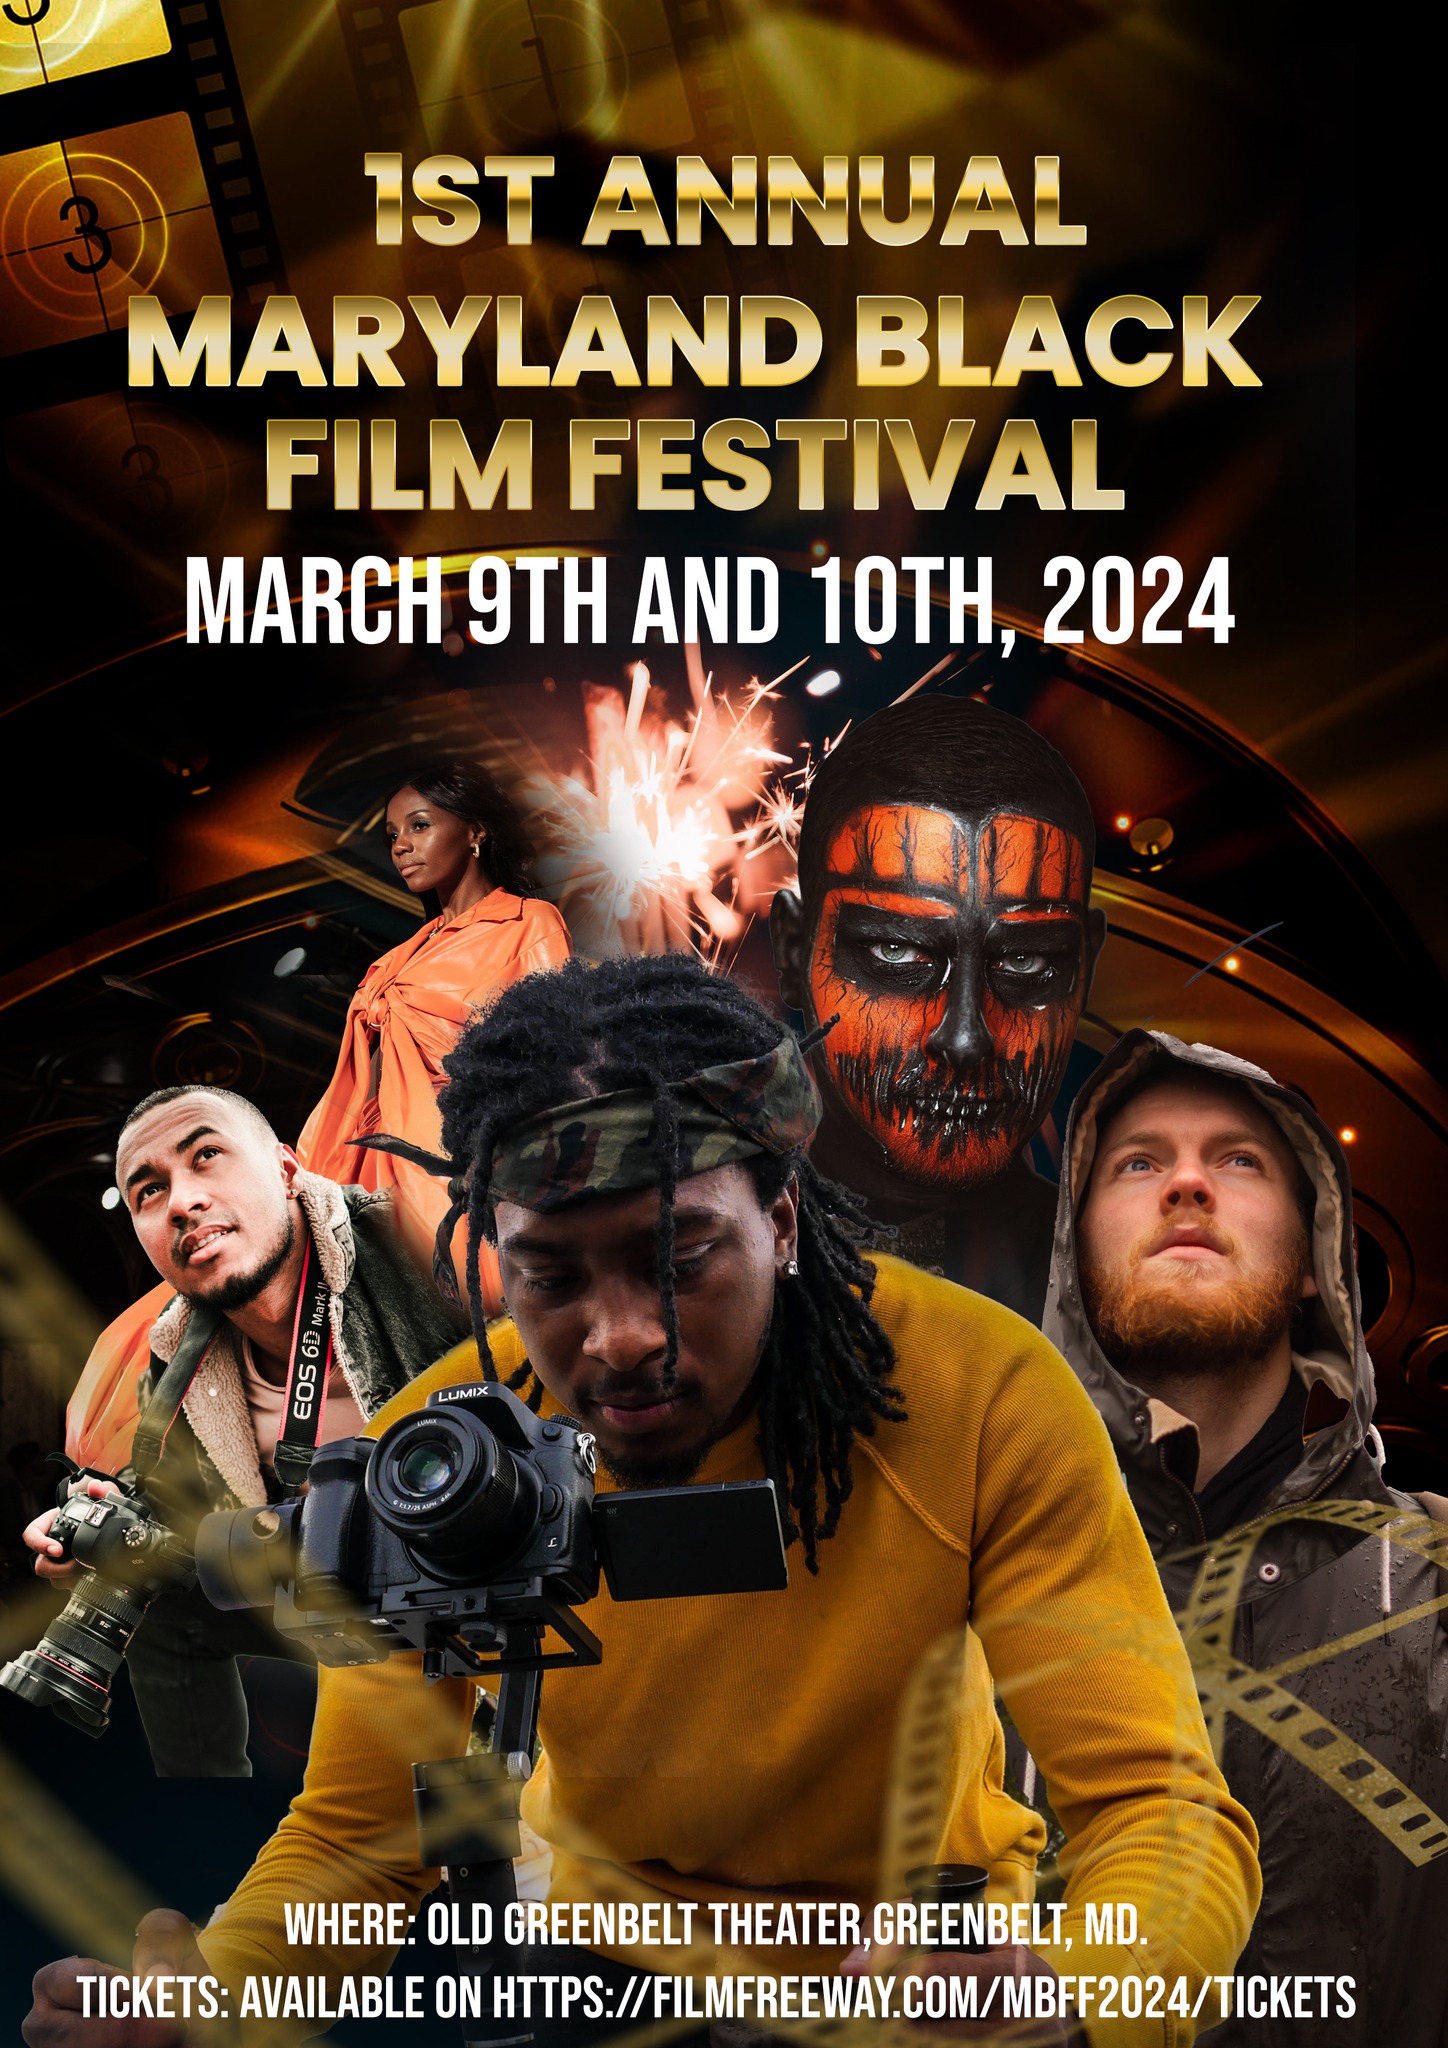 1st Annual Maryland Black Film Festival (MBFF) - Open for Submissions